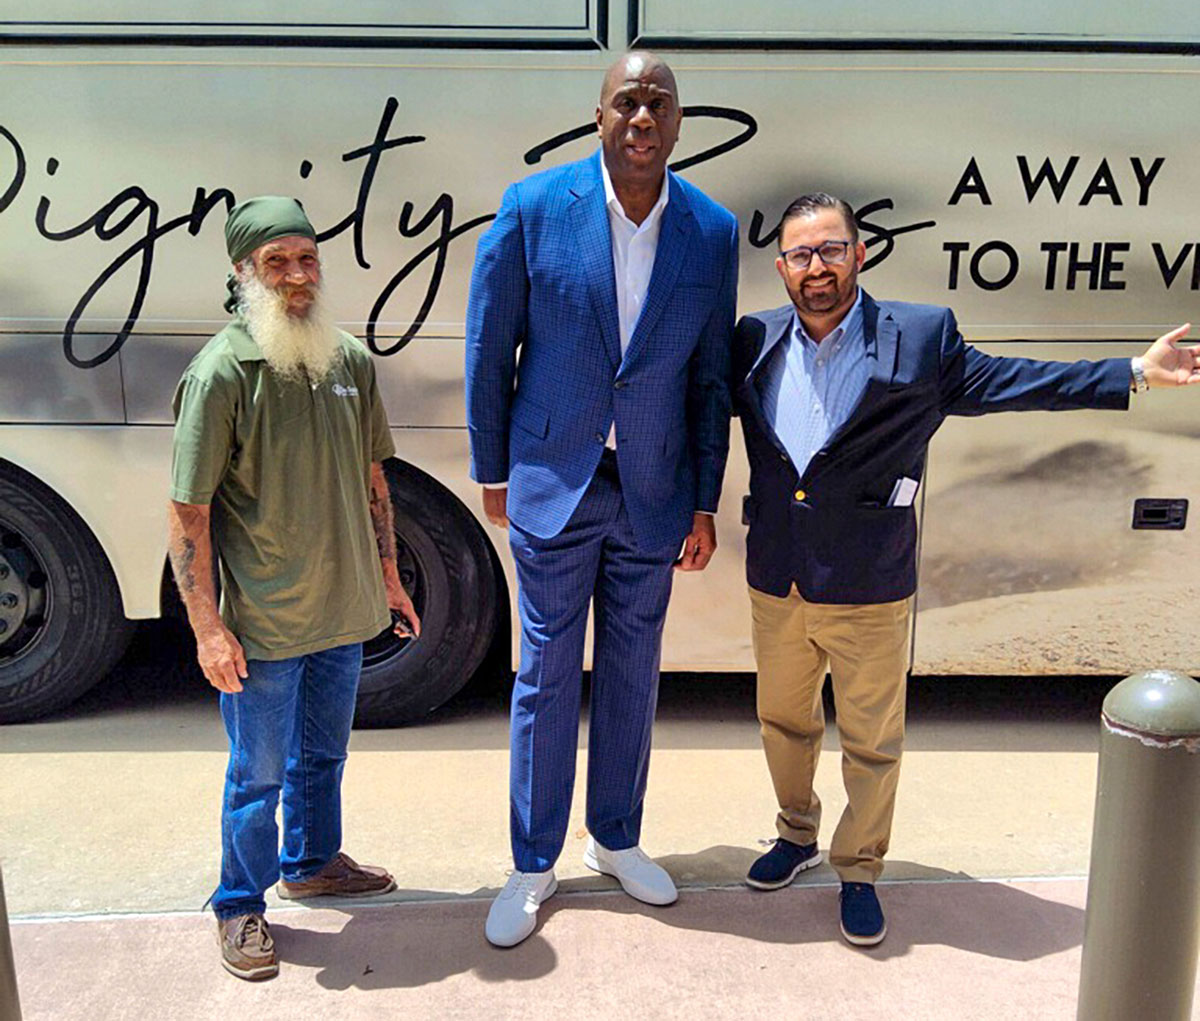 Dignity driver Kyle and The Source executive director Anthony Zorbaugh and Magic Johnson